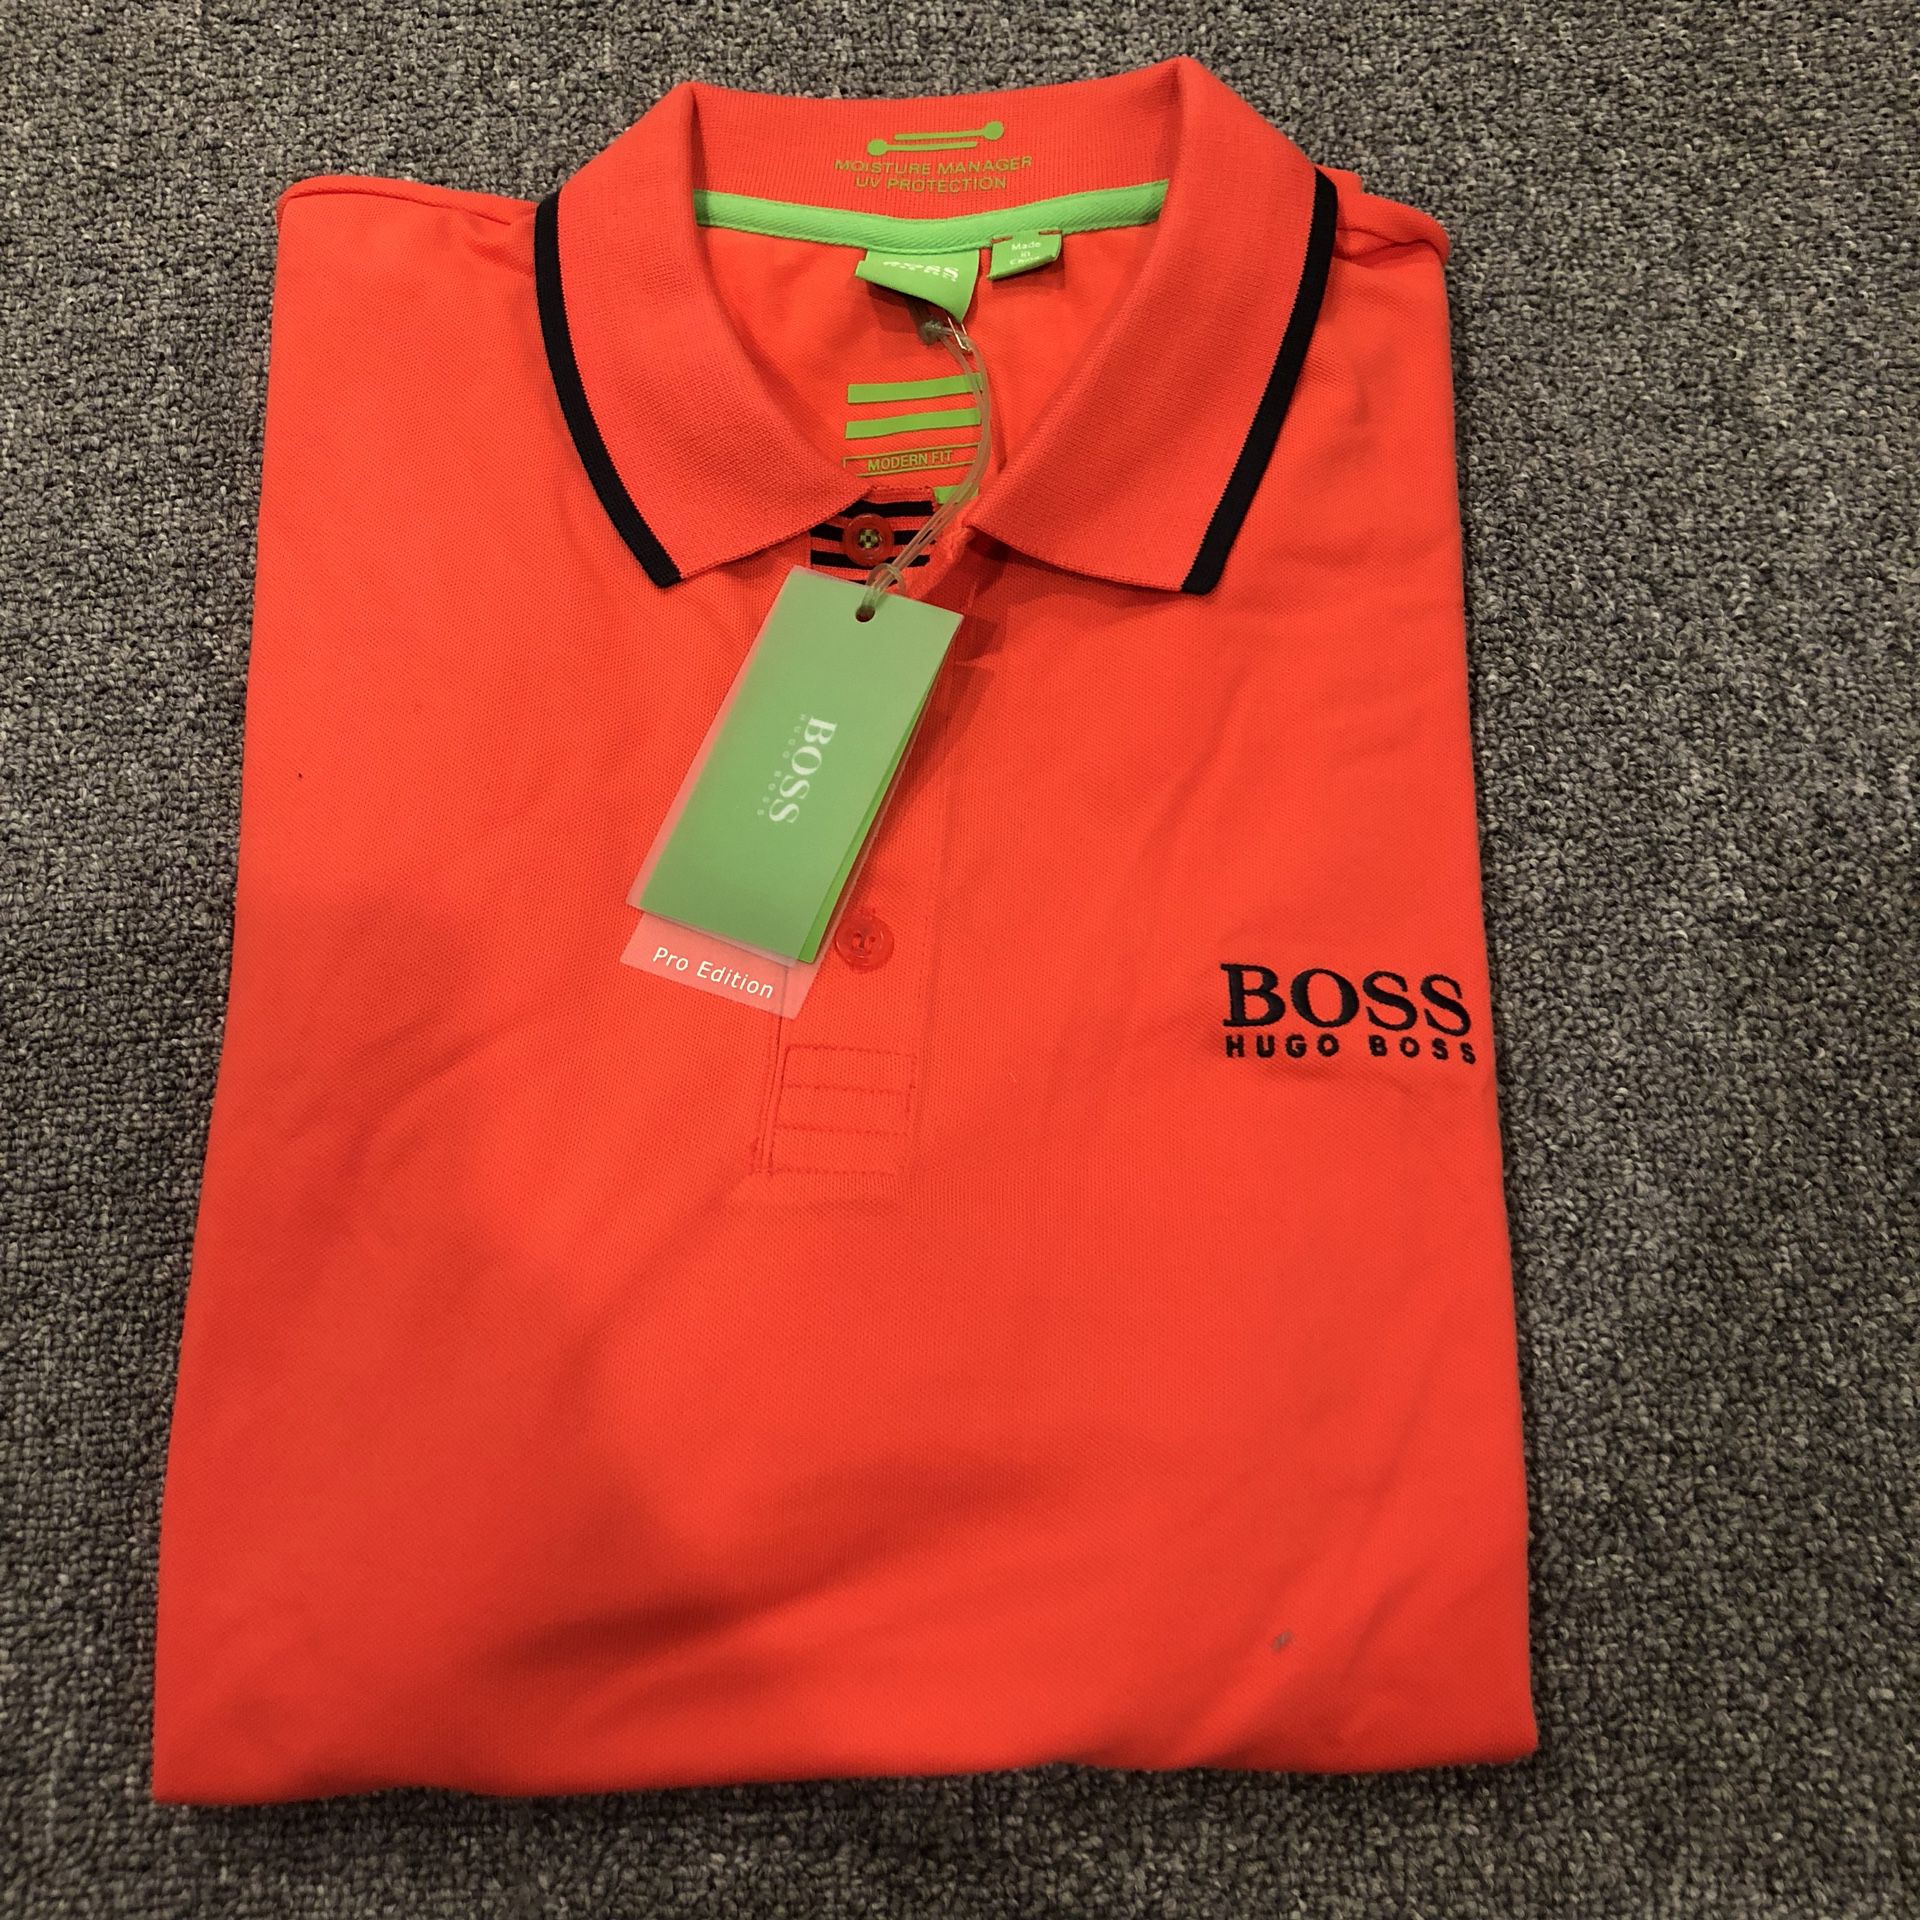 Hugo boss modern men polo shirts size for Sale in Queens, NY - OfferUp